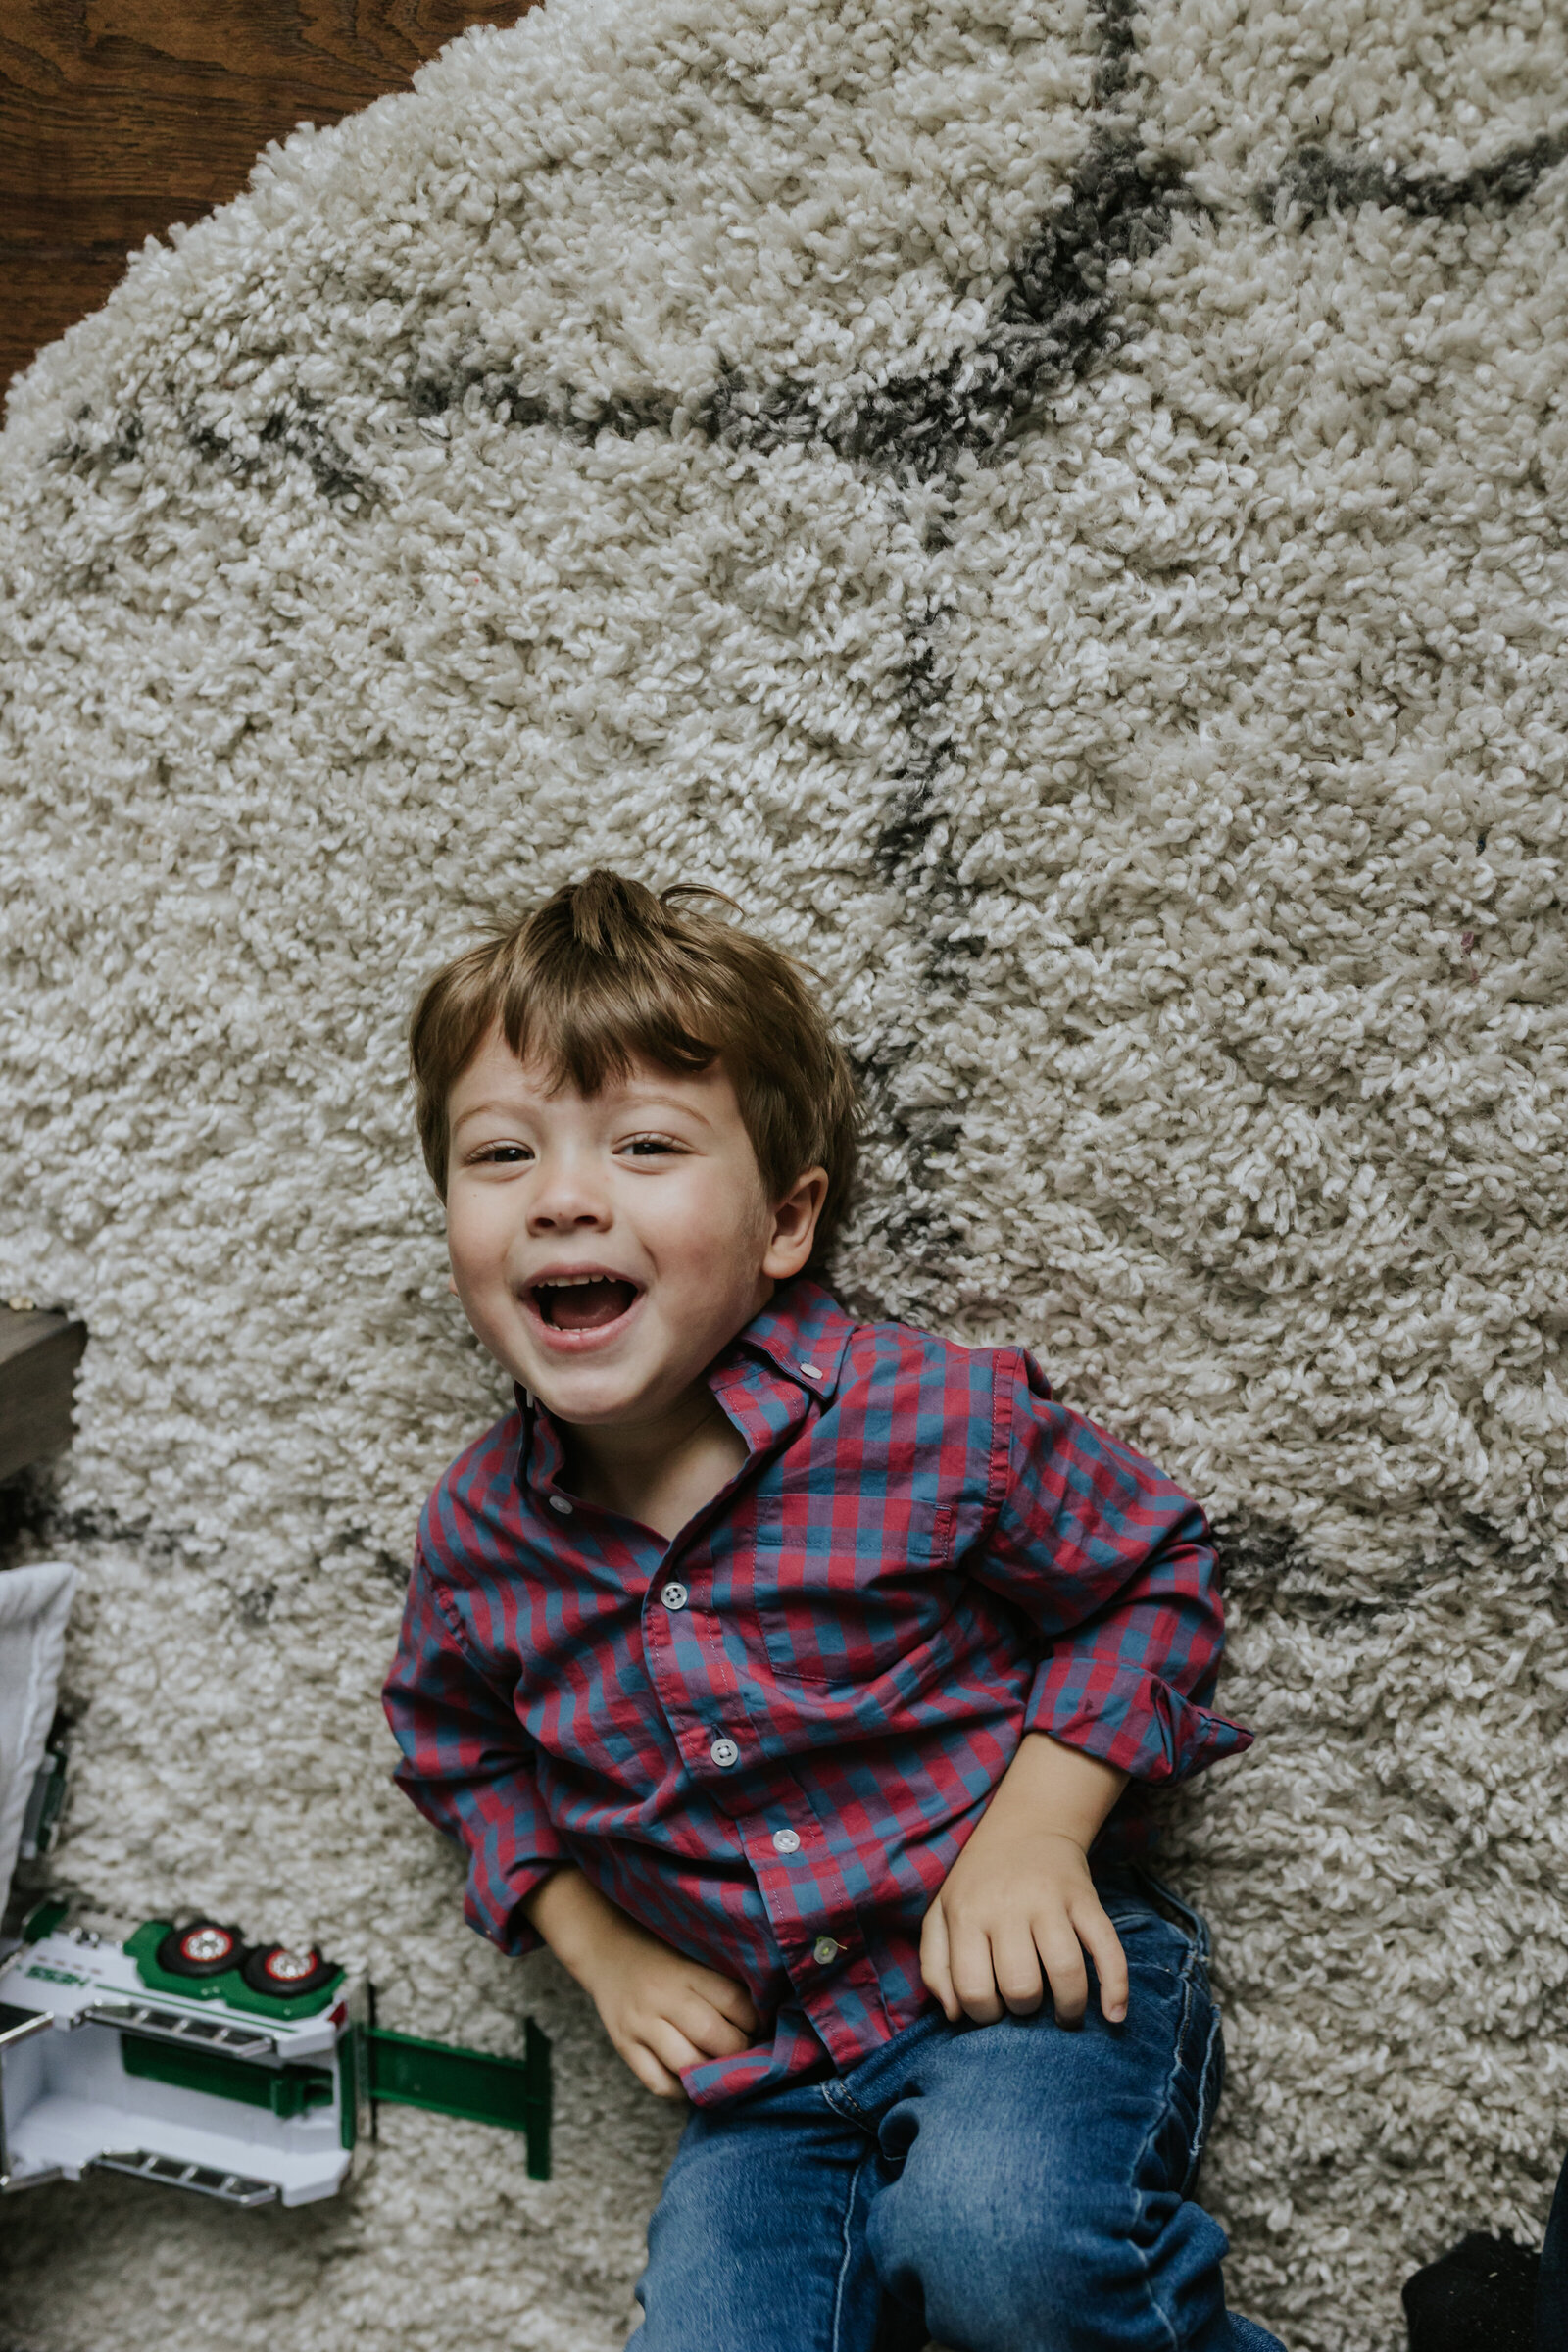 A young boy lays on his back on a shag rug and laughs